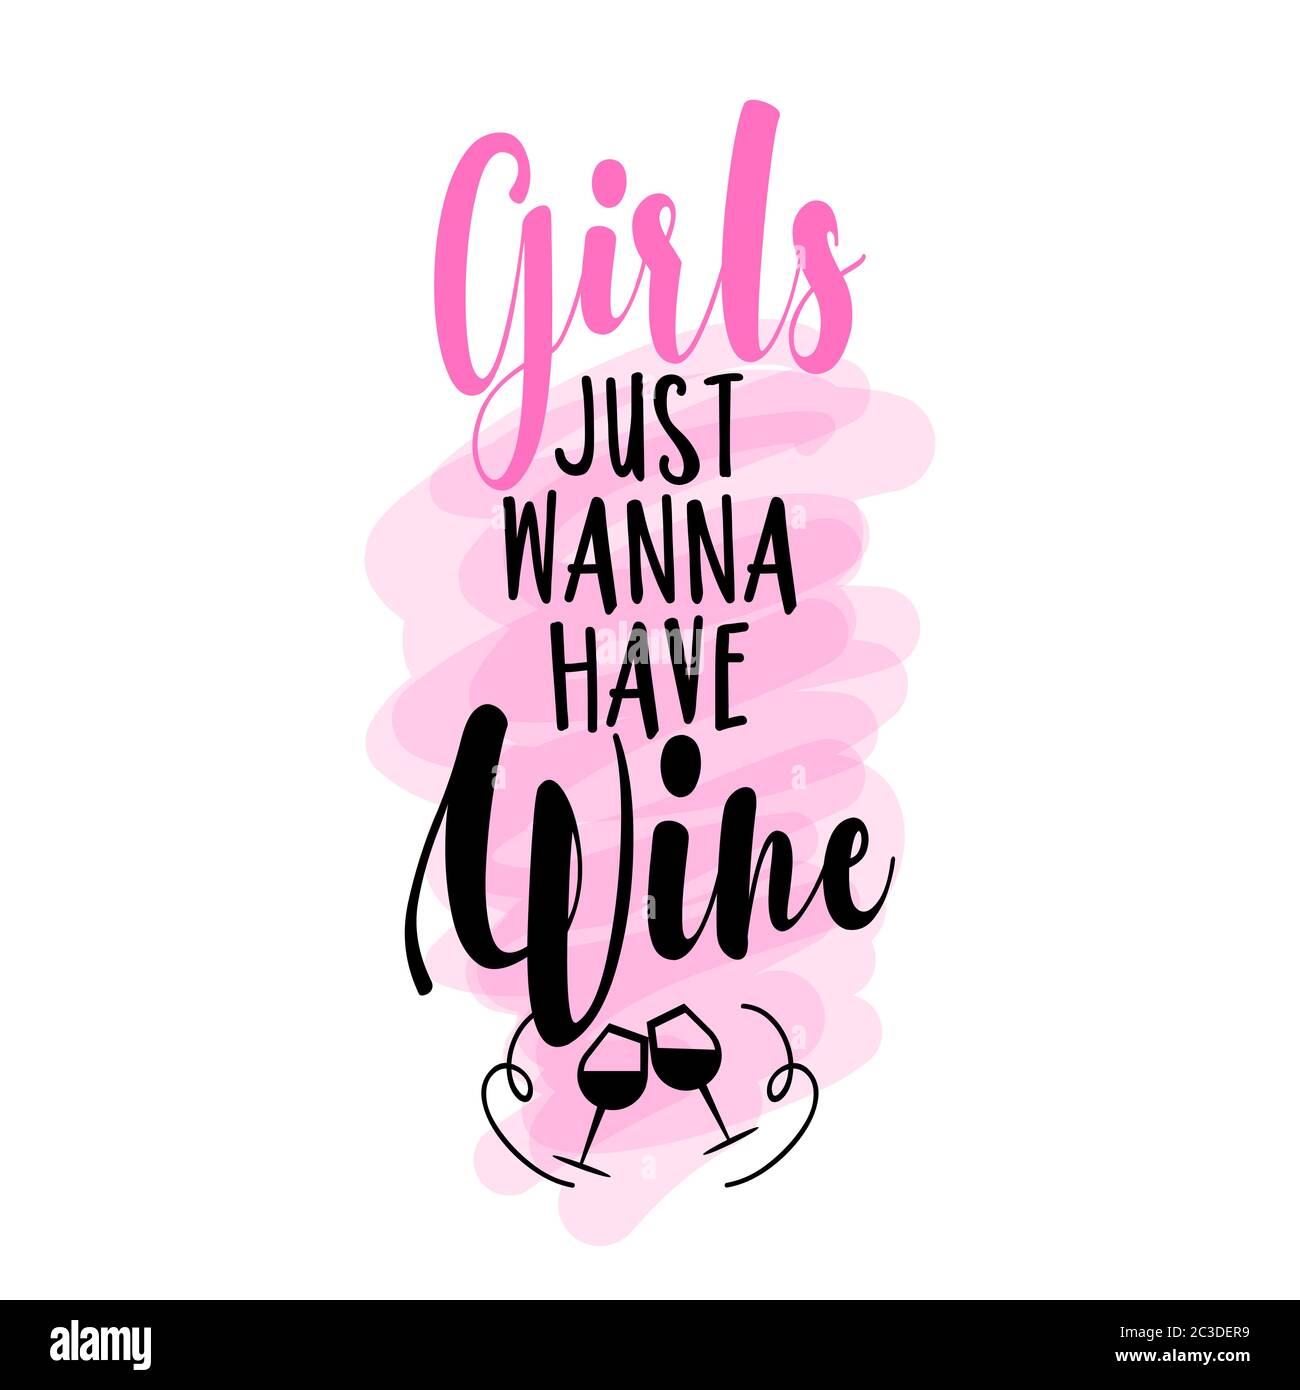 Girls just wanna have wine - Lettering inspiring calligraphy poster with text. Greeting card for hen party; womens day gift... Stock Vector